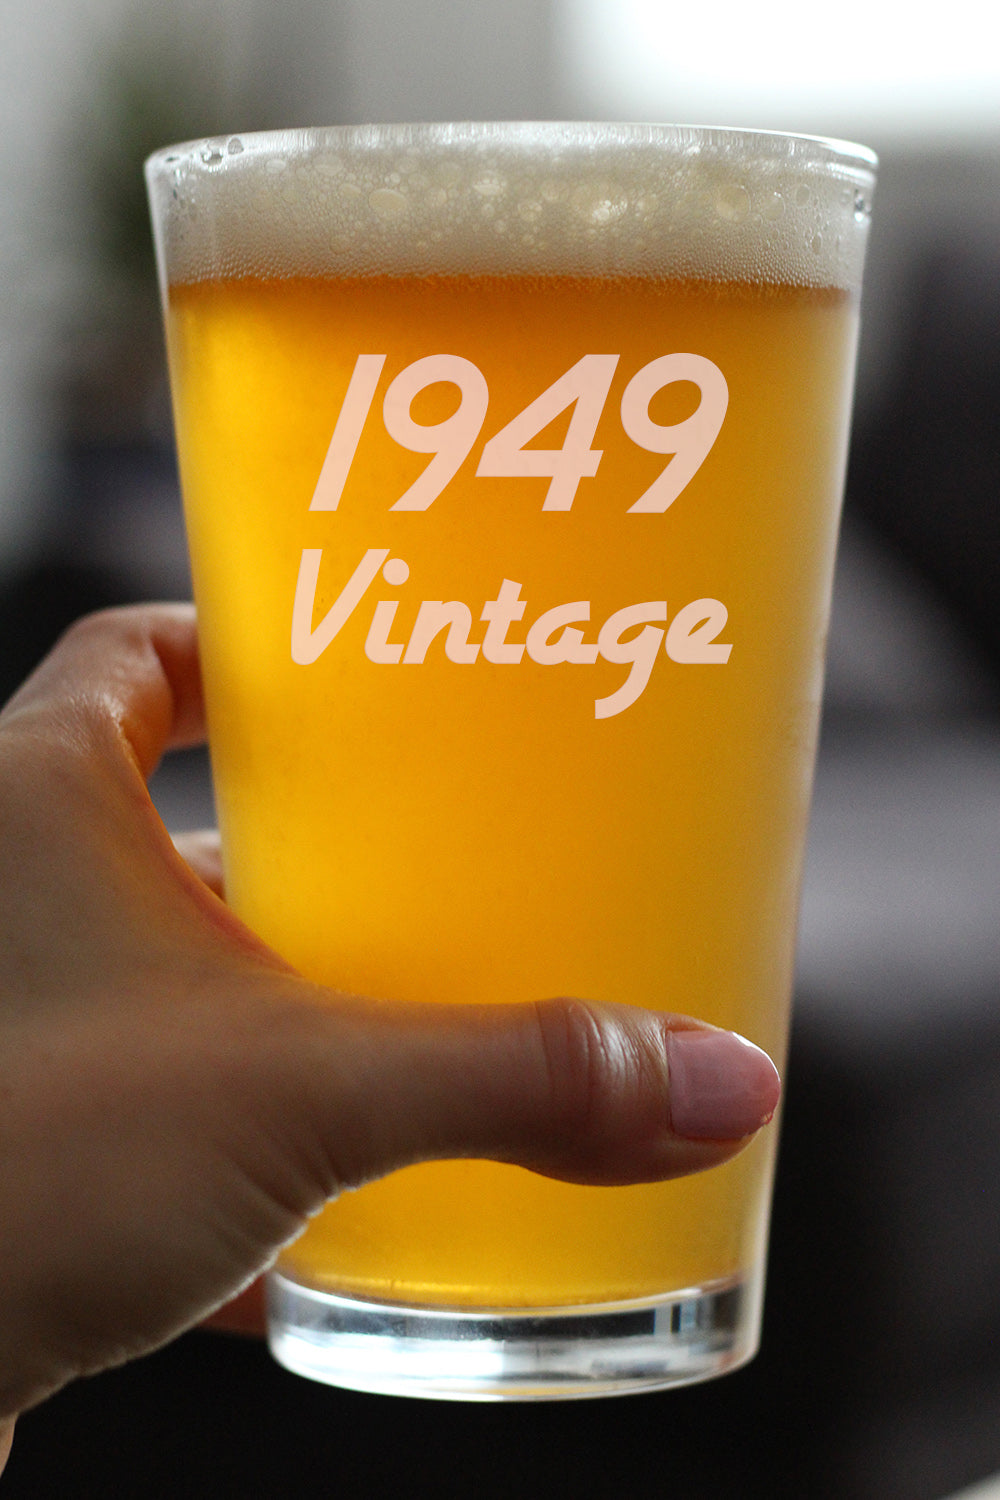 Vintage 1949 - Pint Glass for Beer - 75th Birthday Gifts for Men or Women Turning 75 - Fun Bday Party Decor - 16 oz